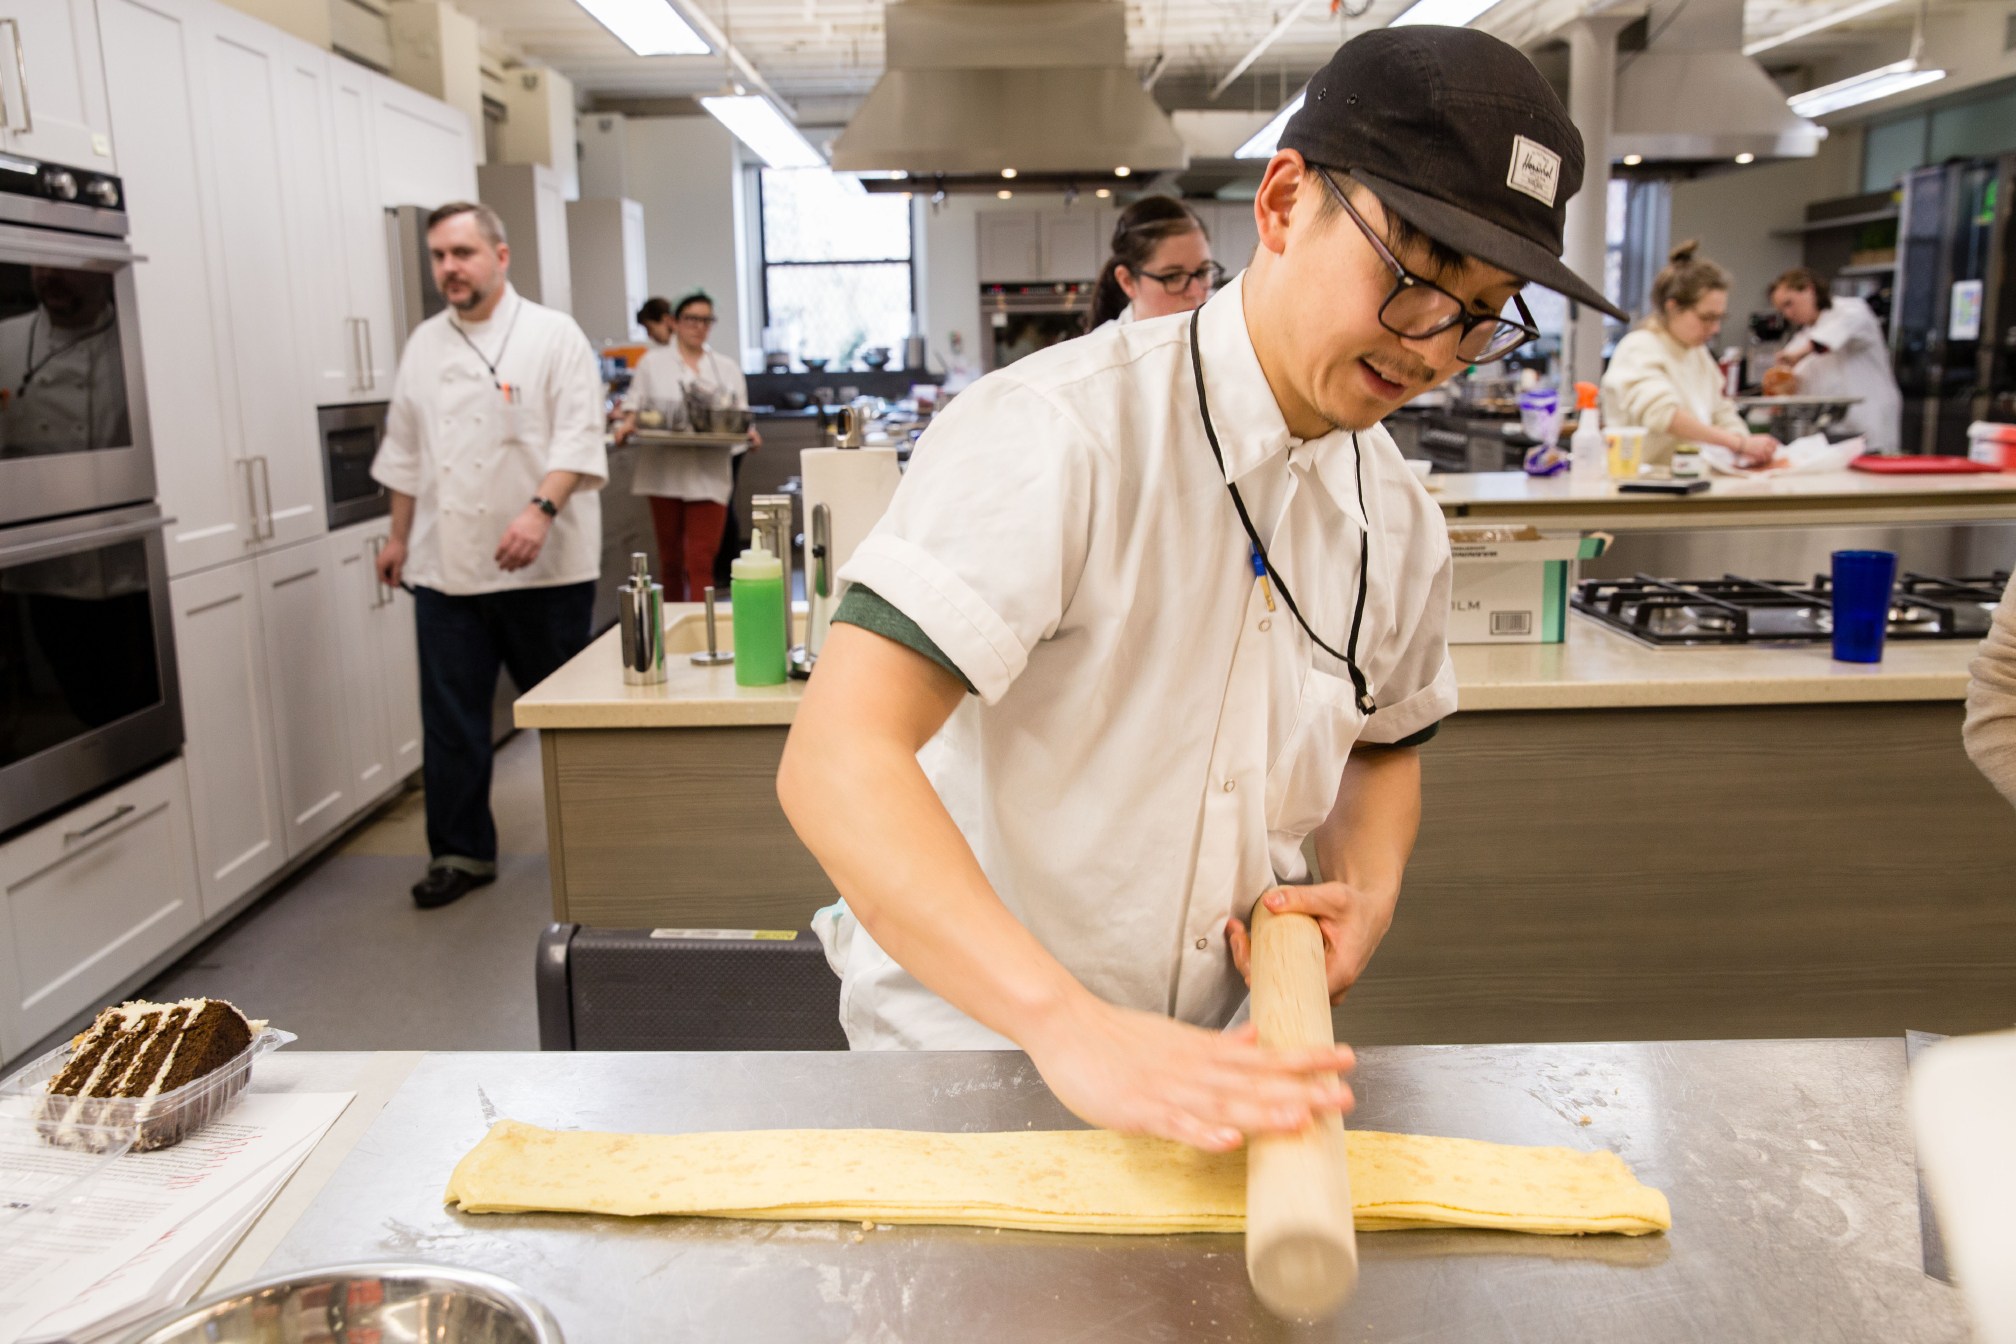 Cook's Science associate editor Tim Chin uses a rolling pin to compress four stacked sheets of pastry dough brushed with butter and sprinkled with sugar while working on an in-development recipe for laminate pastry.